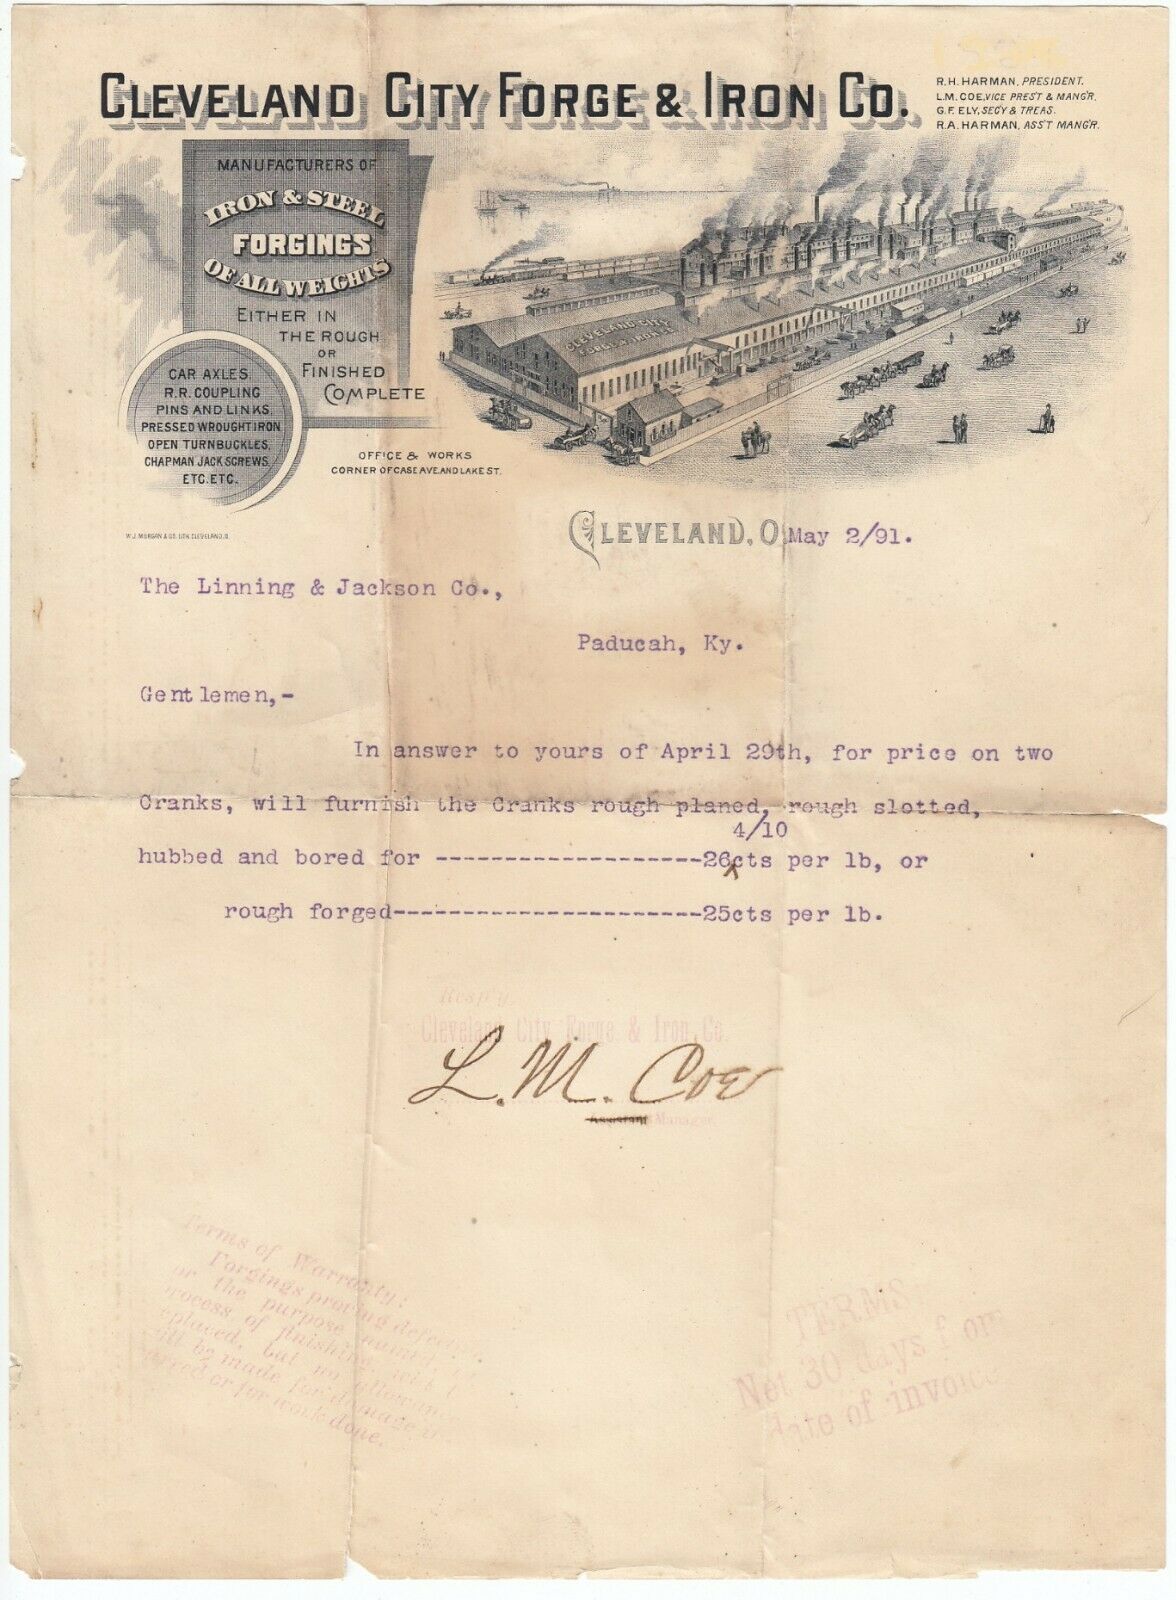 Cleveland City Forge 1891 Ohio Letter, Graphic Letterhead - Historical Company